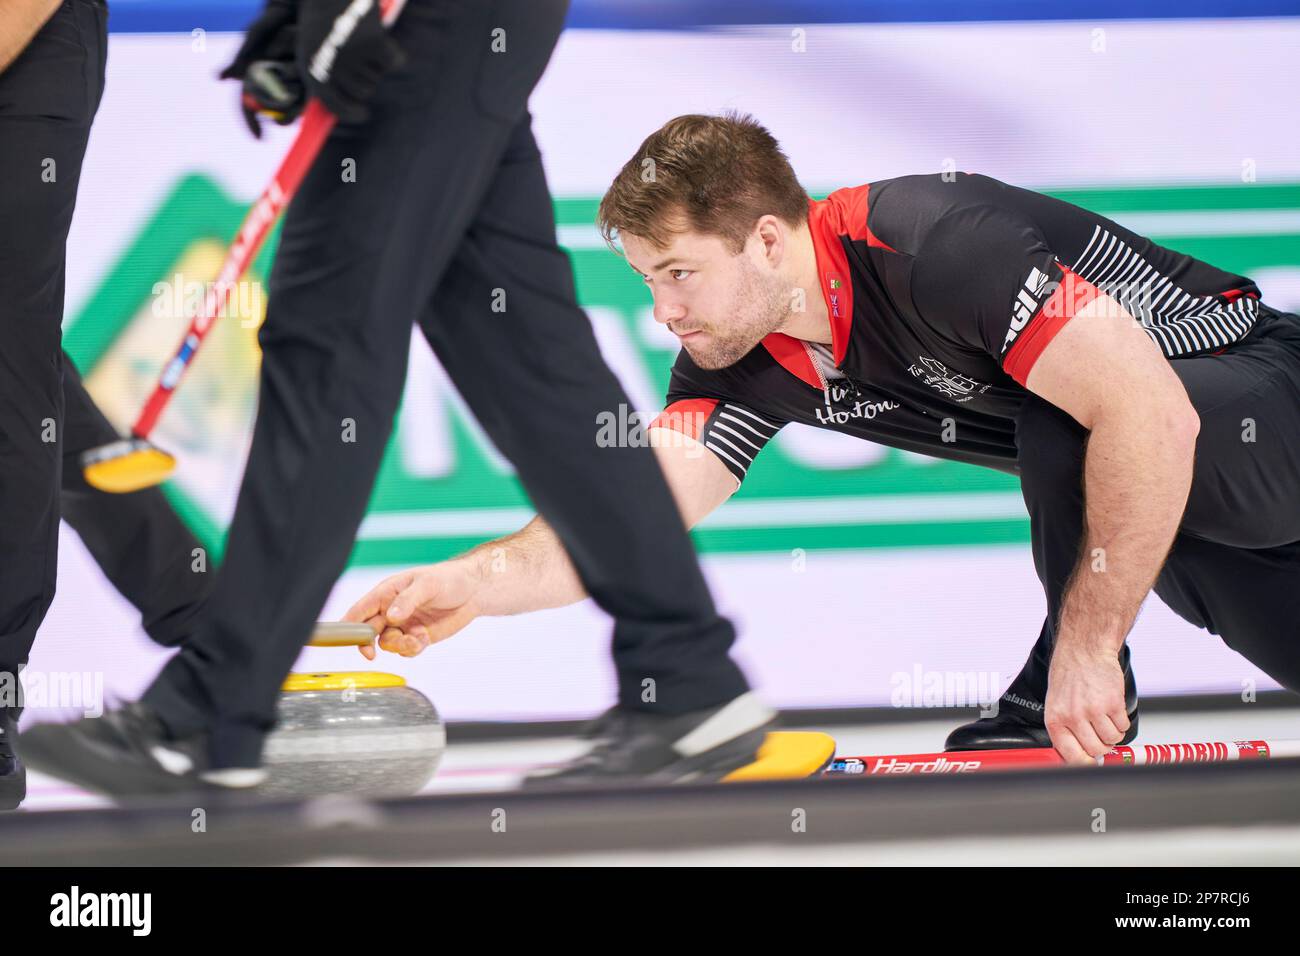 Ontario lead Joey Hart releases his shot during their match against New Brunswick at the Tim Hortons Brier curling event Wednesday, March 8, 2023, in London, Ontario